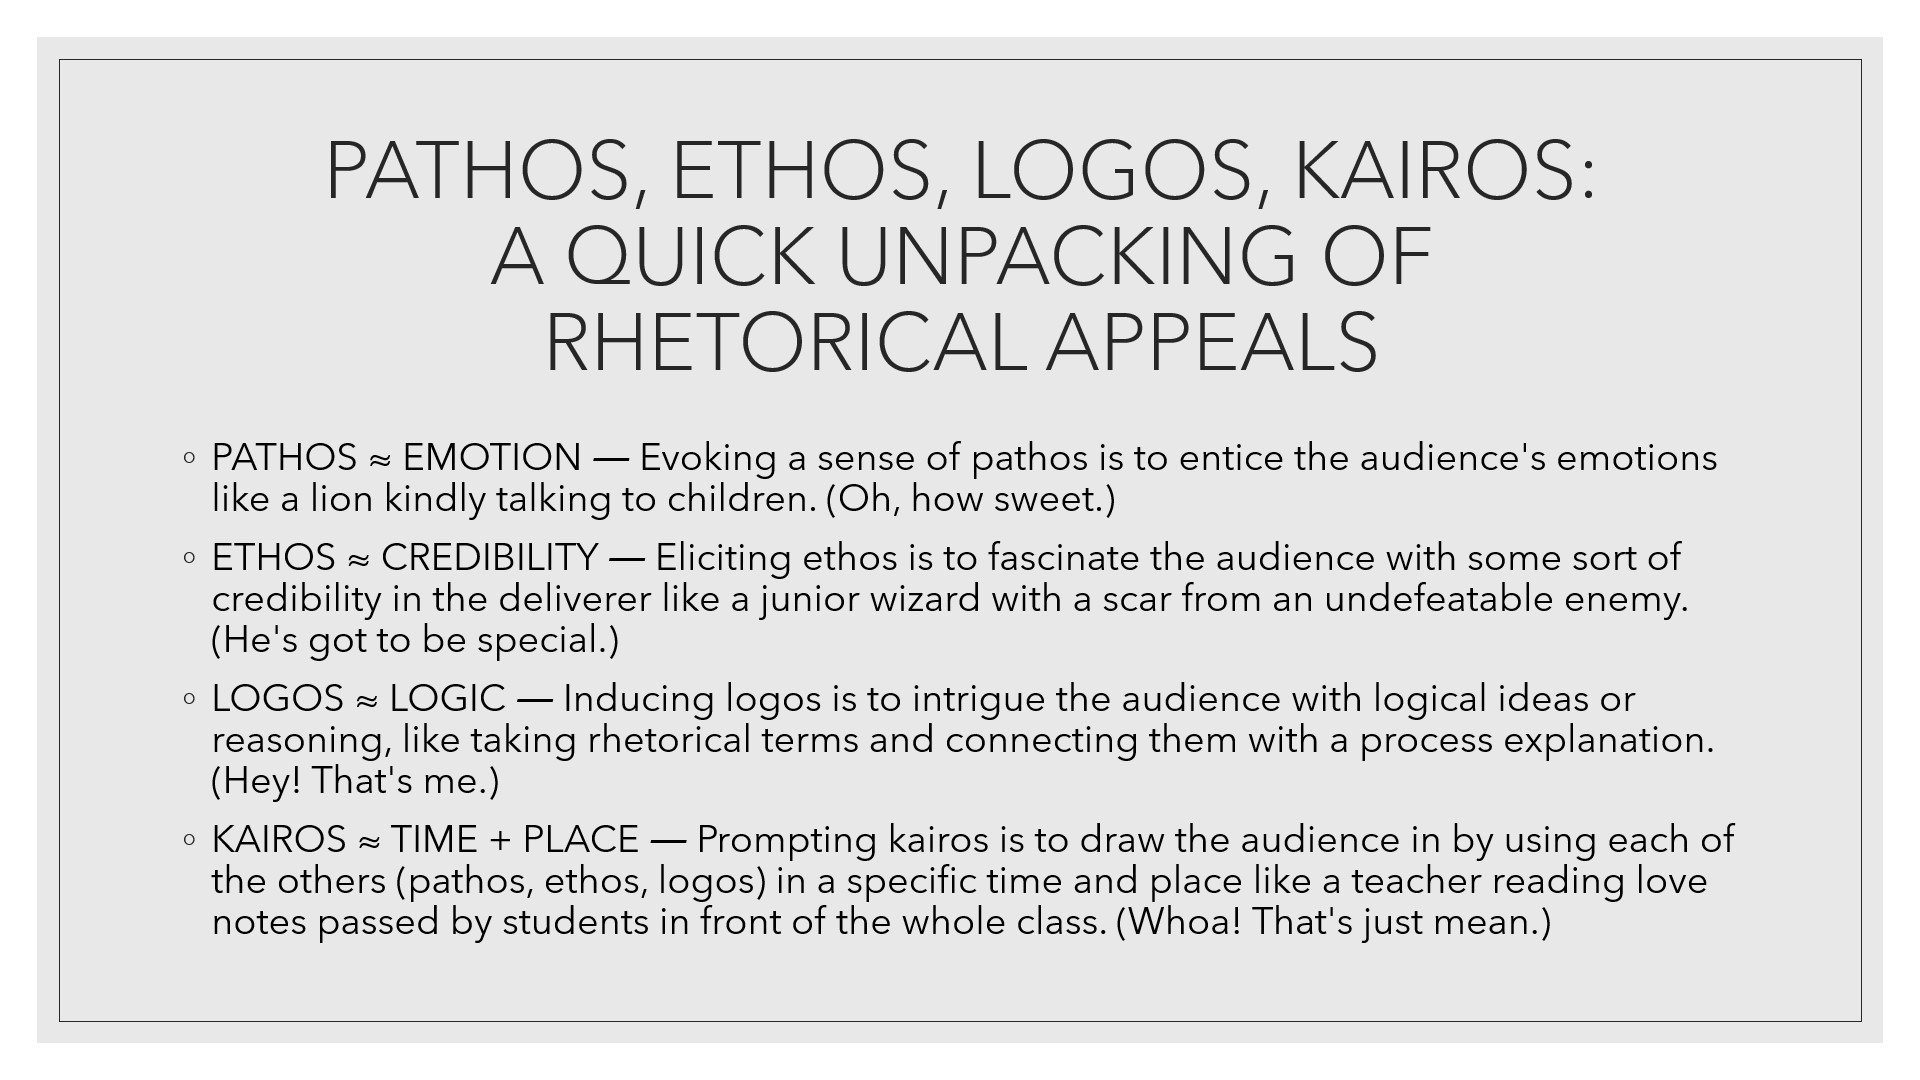 a quick unpacking of rhetorical appeals: pathos roughly equals emotion like a lion kindly talking to children; ethos roughly equals credibility like a junior wizard with a scar from an undefeatable enemy; logos roughly equals logic like taking rhetorical terms and linking them with a process; kairos roughly equals time and place, like a teacher reading confiscated love notes in front of the whole class